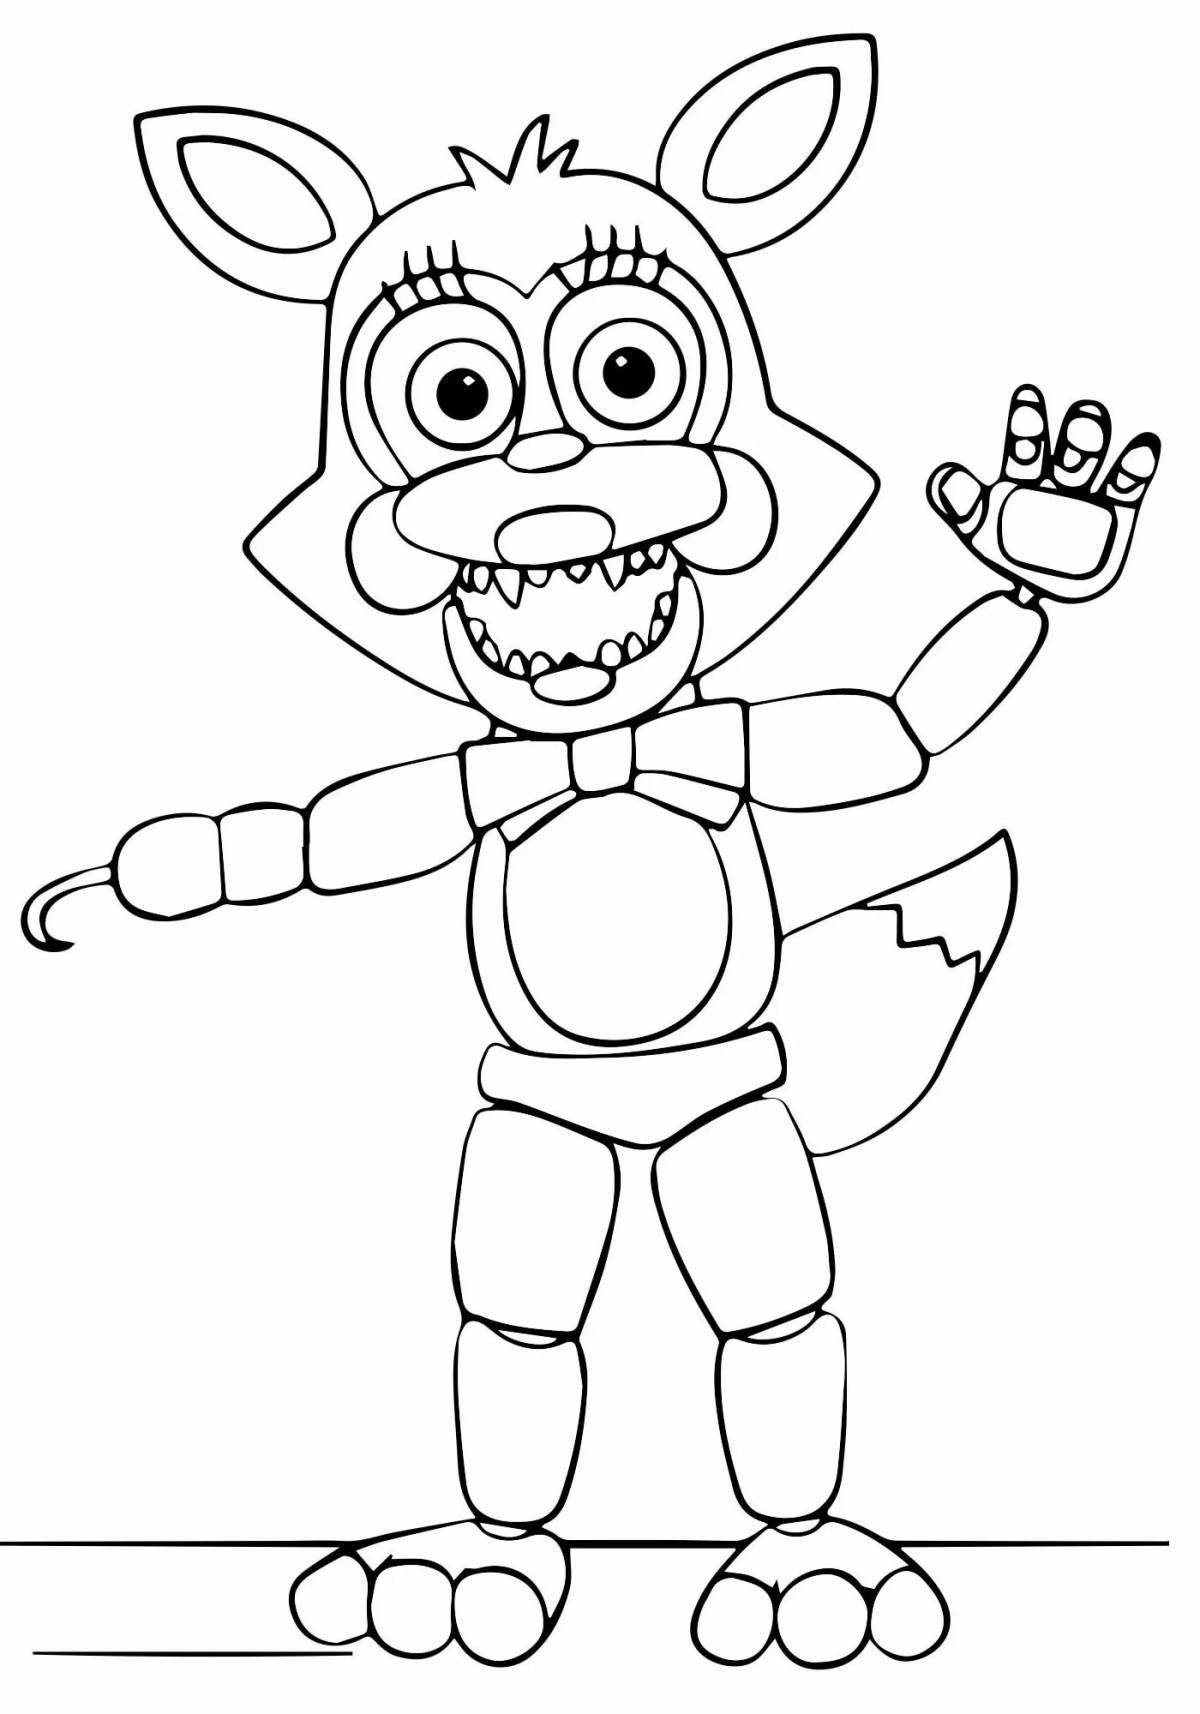 Coloring for animatronics for boys